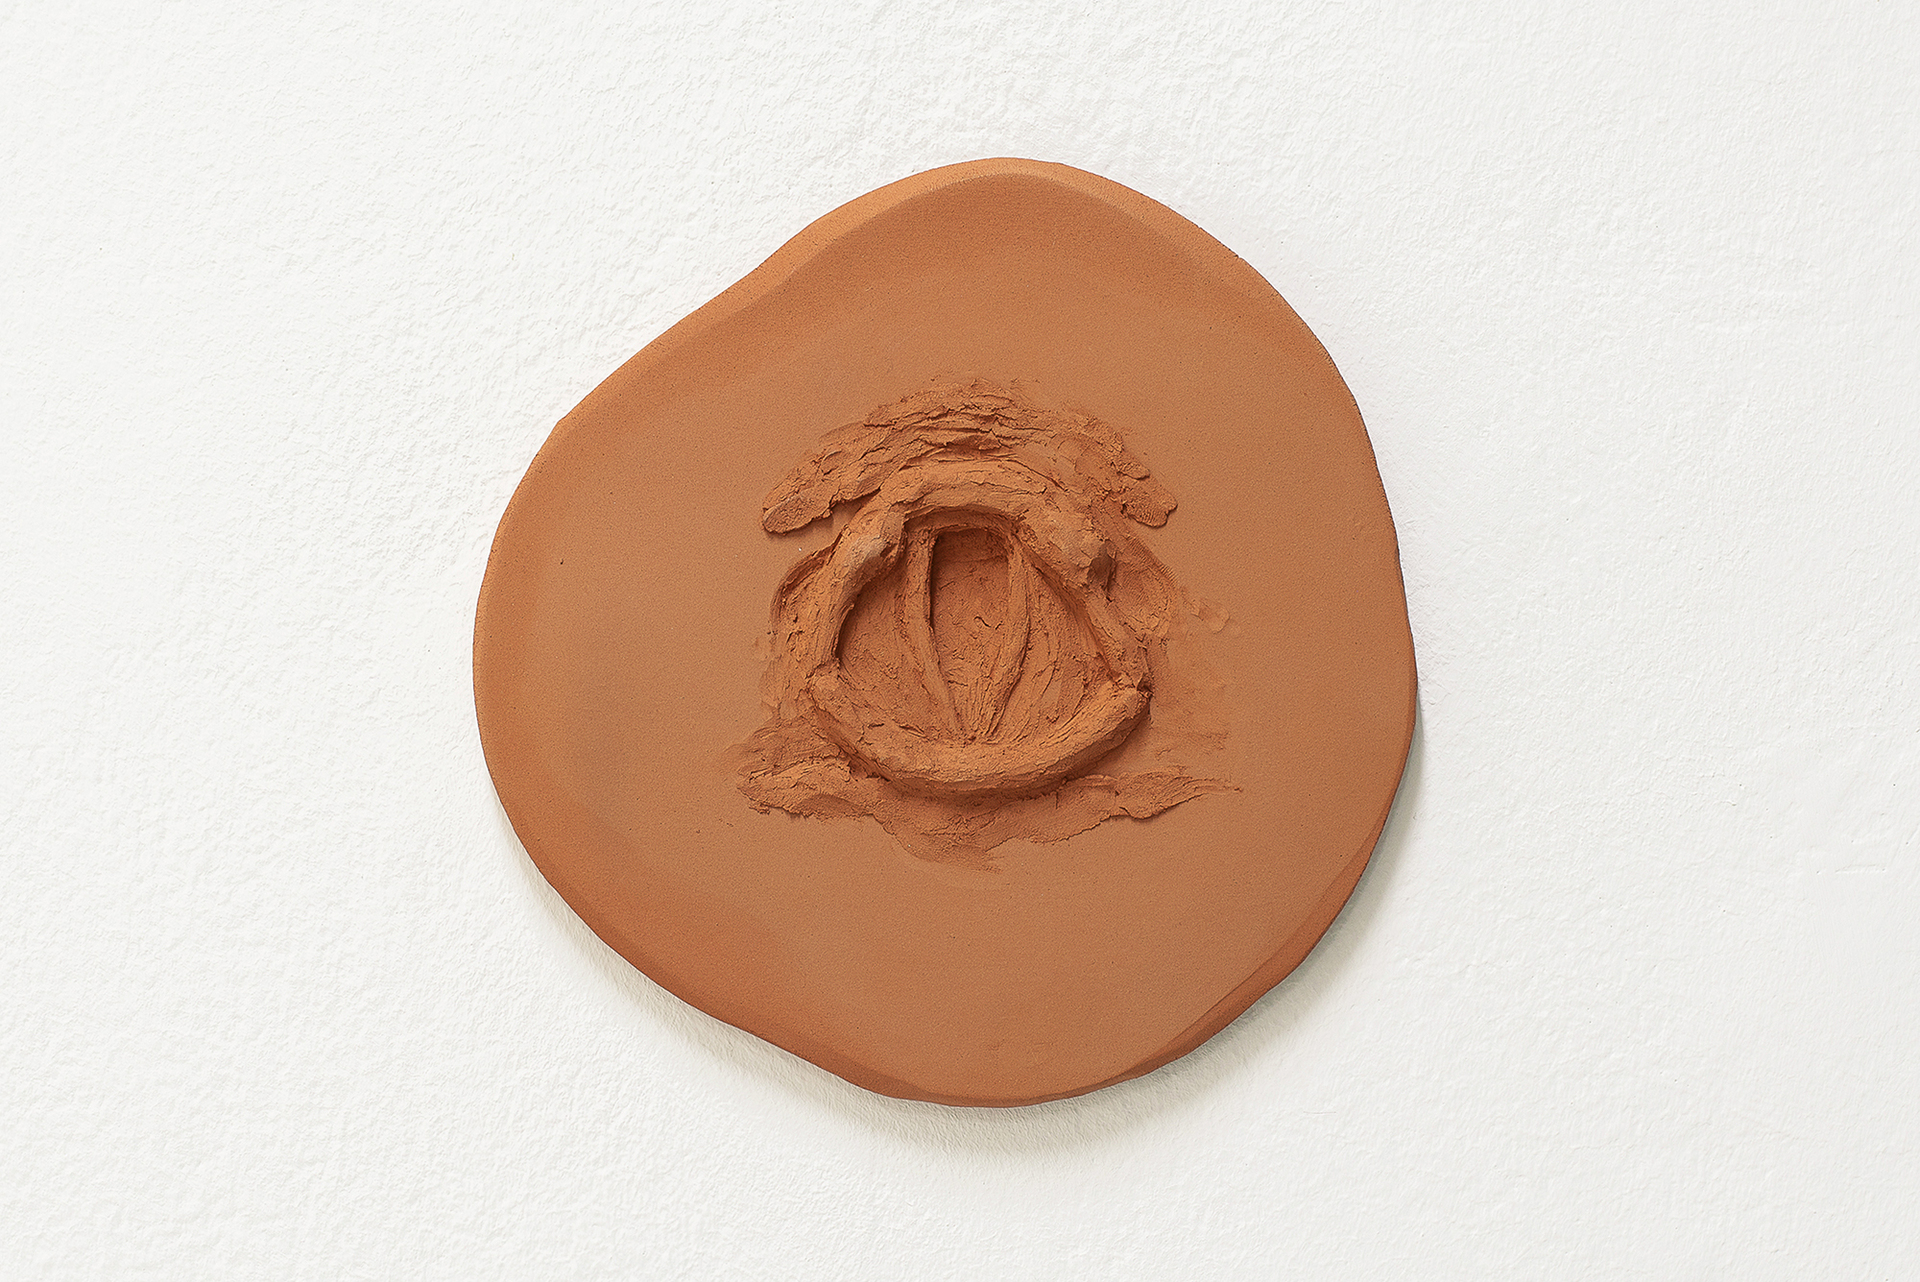 15 Leontios Toumpouris – For a breath in between, 2022, bisque-fired terracotta, calcium bentonite clay, grinded ores, 22 x 22 x 2 cm.